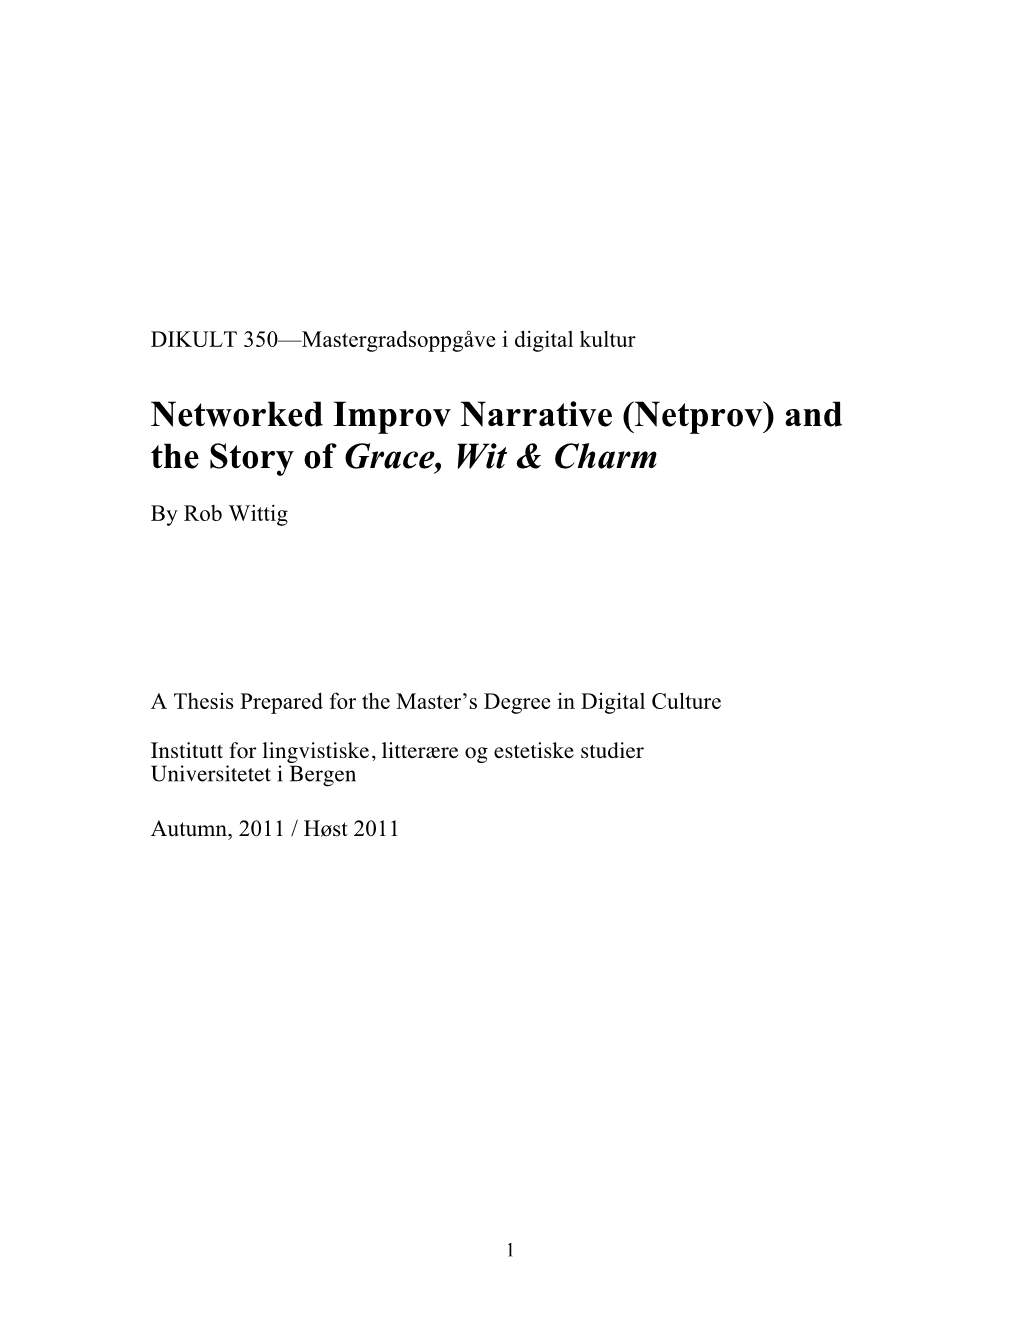 Networked Improv Narrative (Netprov) and the Story of Grace, Wit & Charm